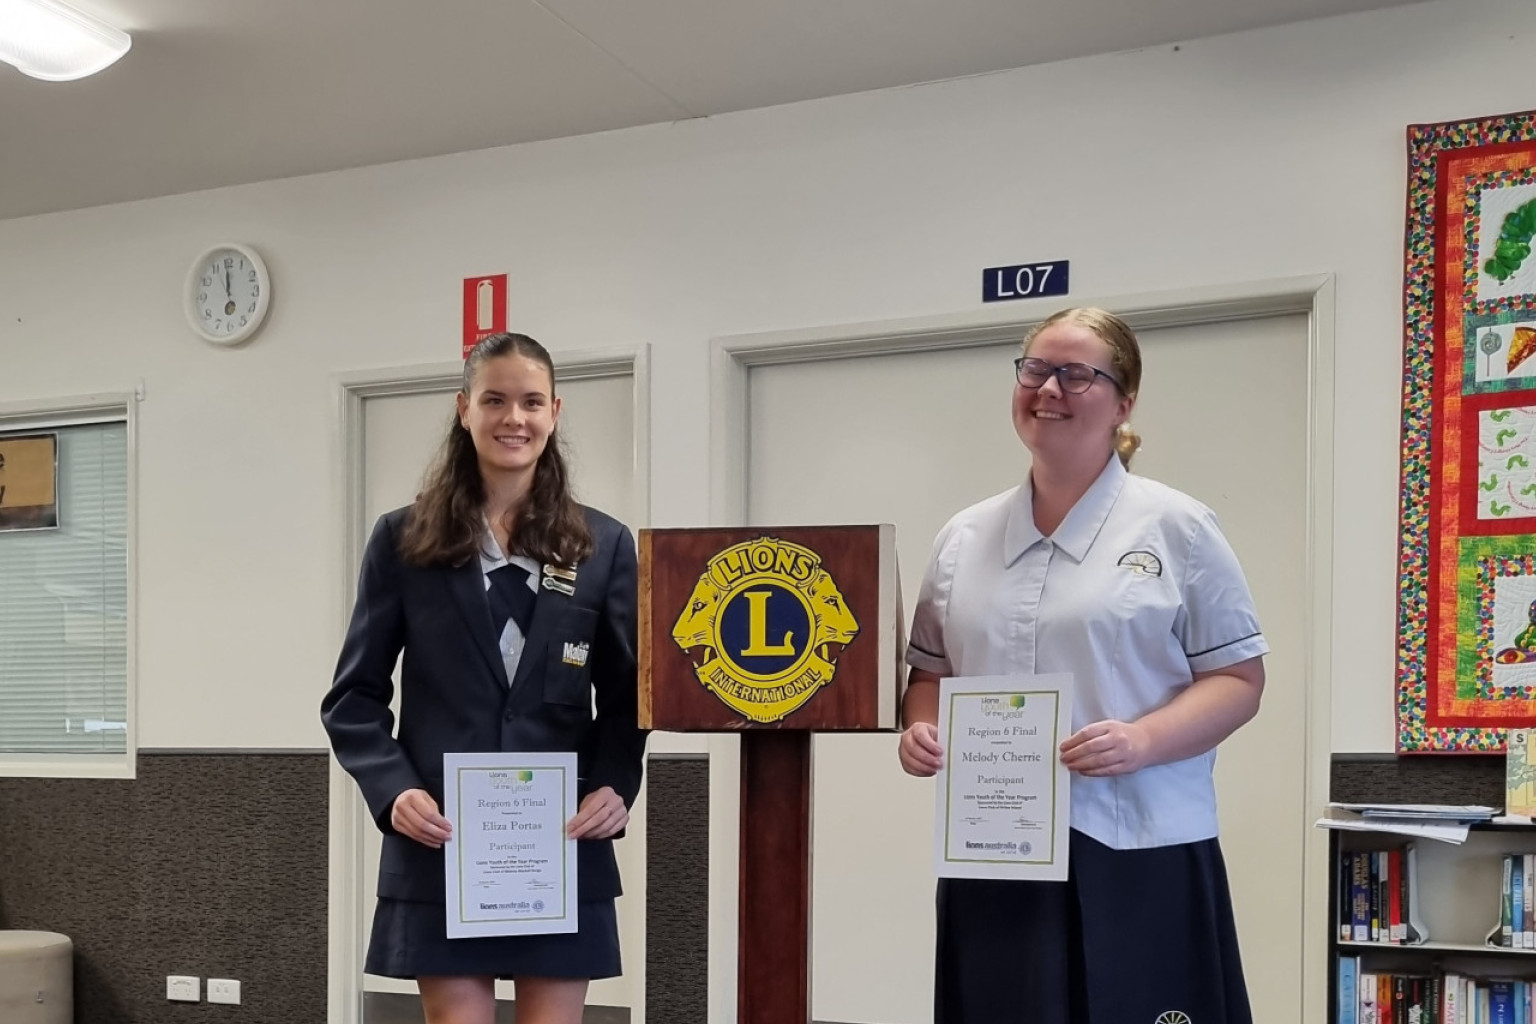 Lions Youth of the Year winner Eliza Portas (left) and runner-up Melody Cherrie (right).